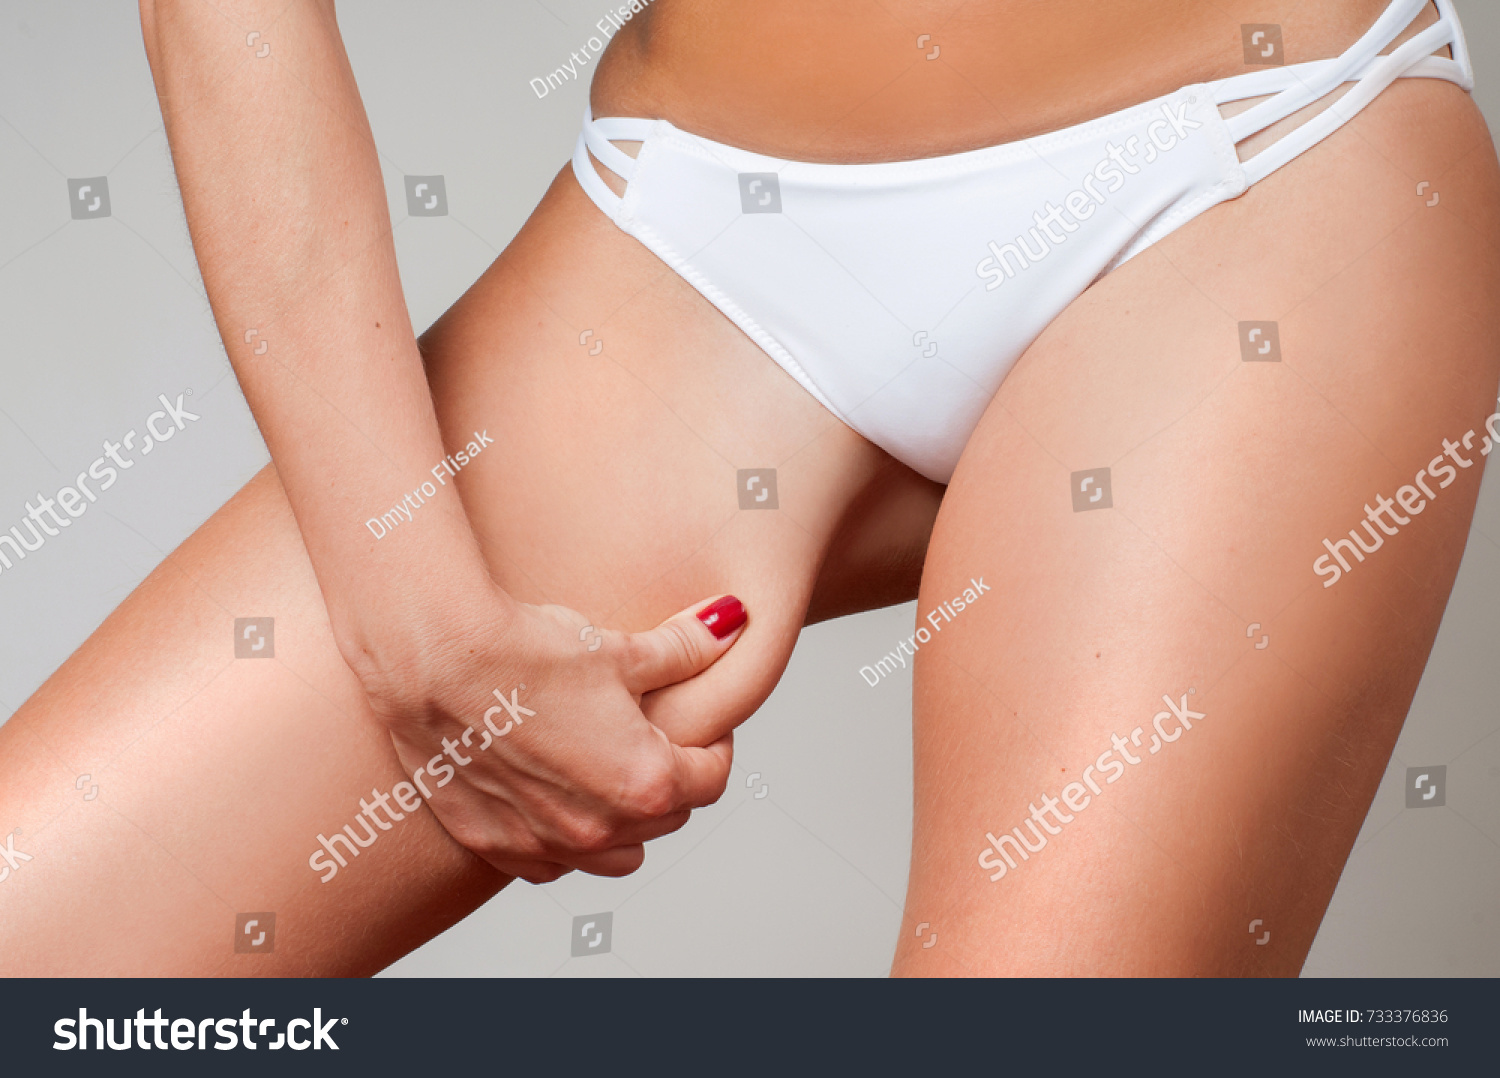  Woman grabbing skin on her leg. Cellulite fat removal skin. Lose weight and liposuction cellulite removal concept #733376836